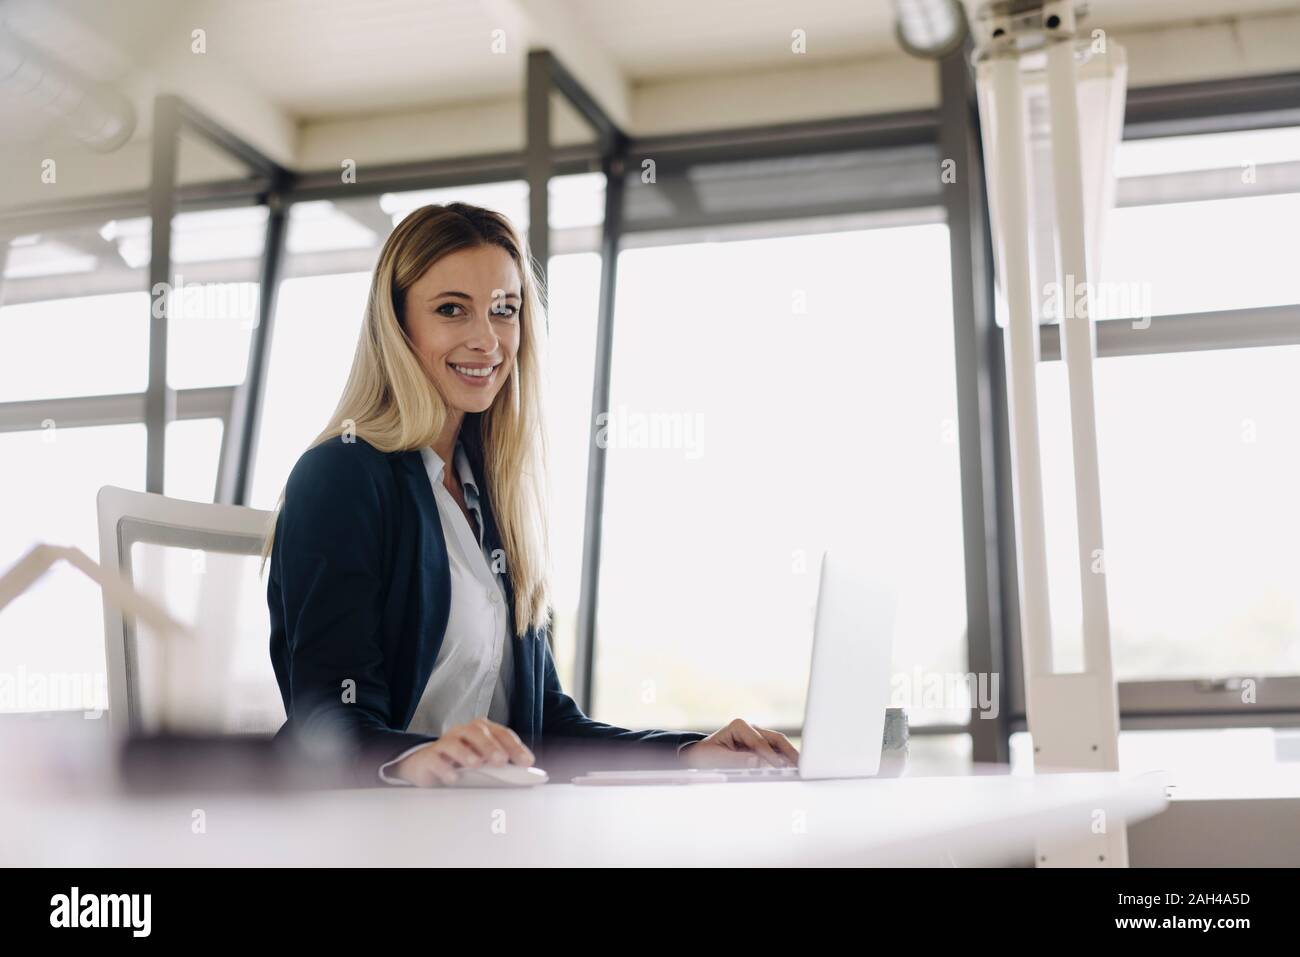 Portrait of a smiling young businesswoman using laptop at desk in office Banque D'Images